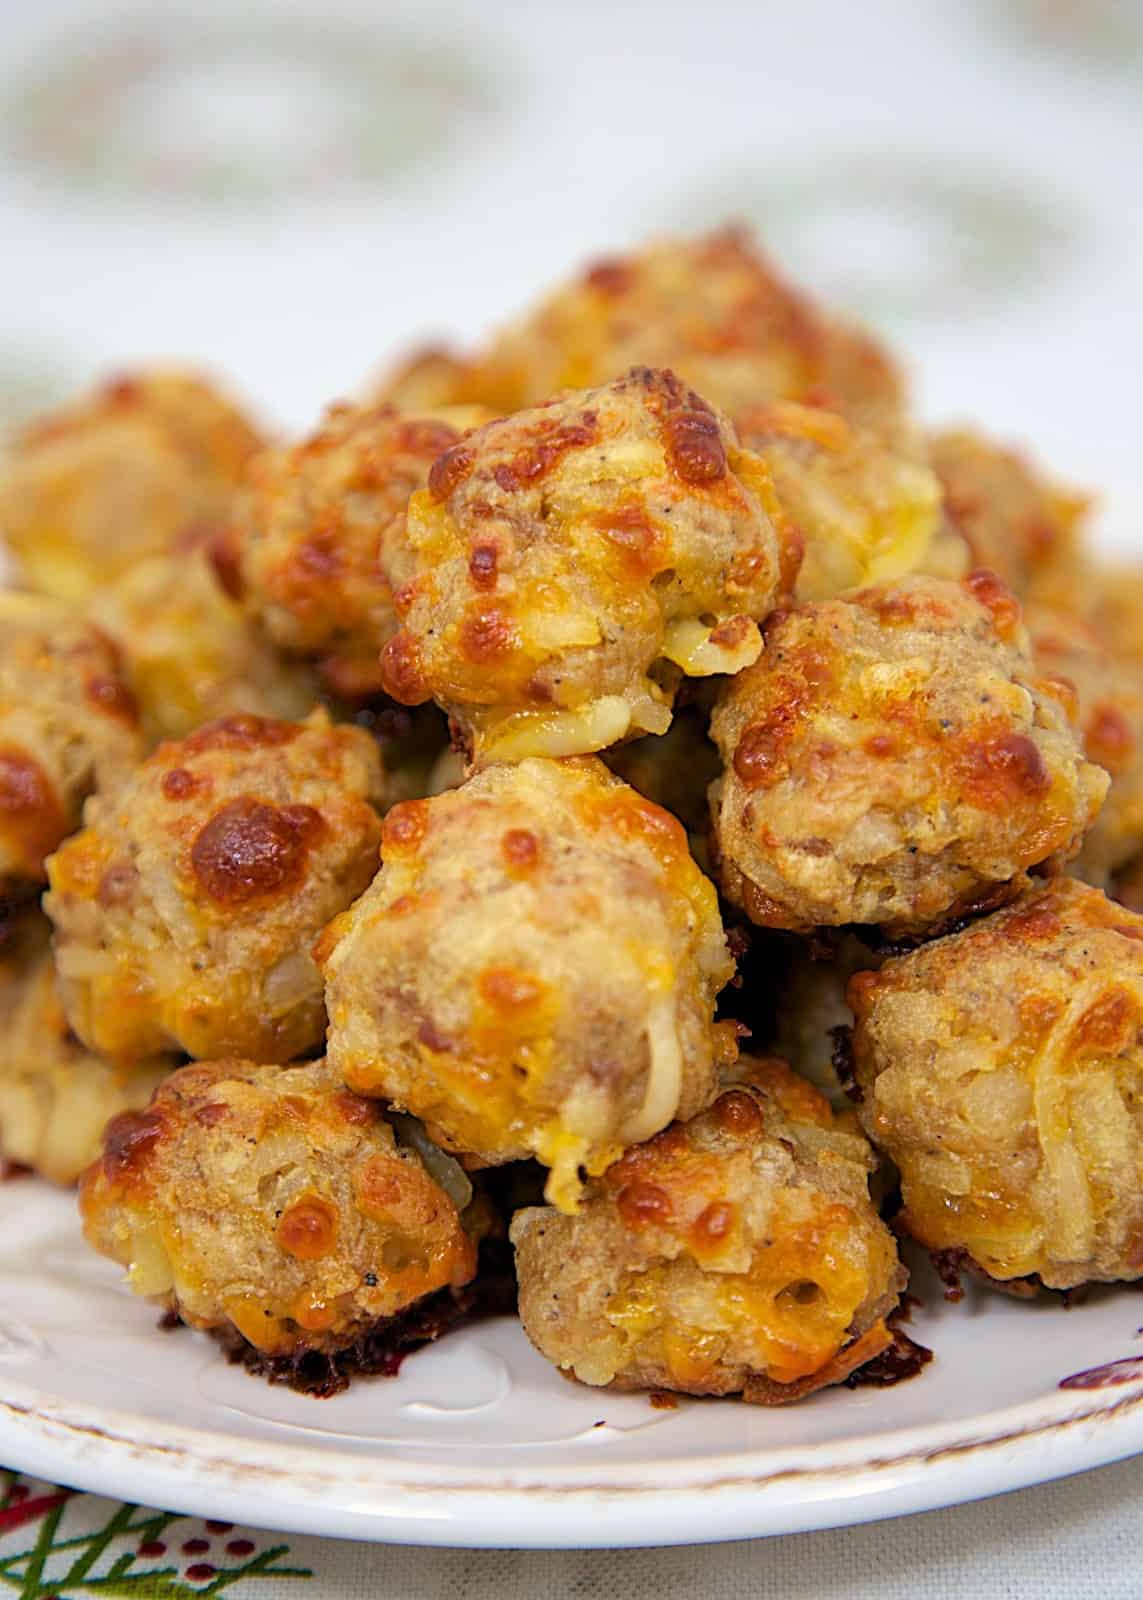 Sausage & Hash Brown Balls - mix together and freezer for a quick snack. Always a HUGE HIT! Can freeze for later. Great for breakfast or at parties. There are never any left!